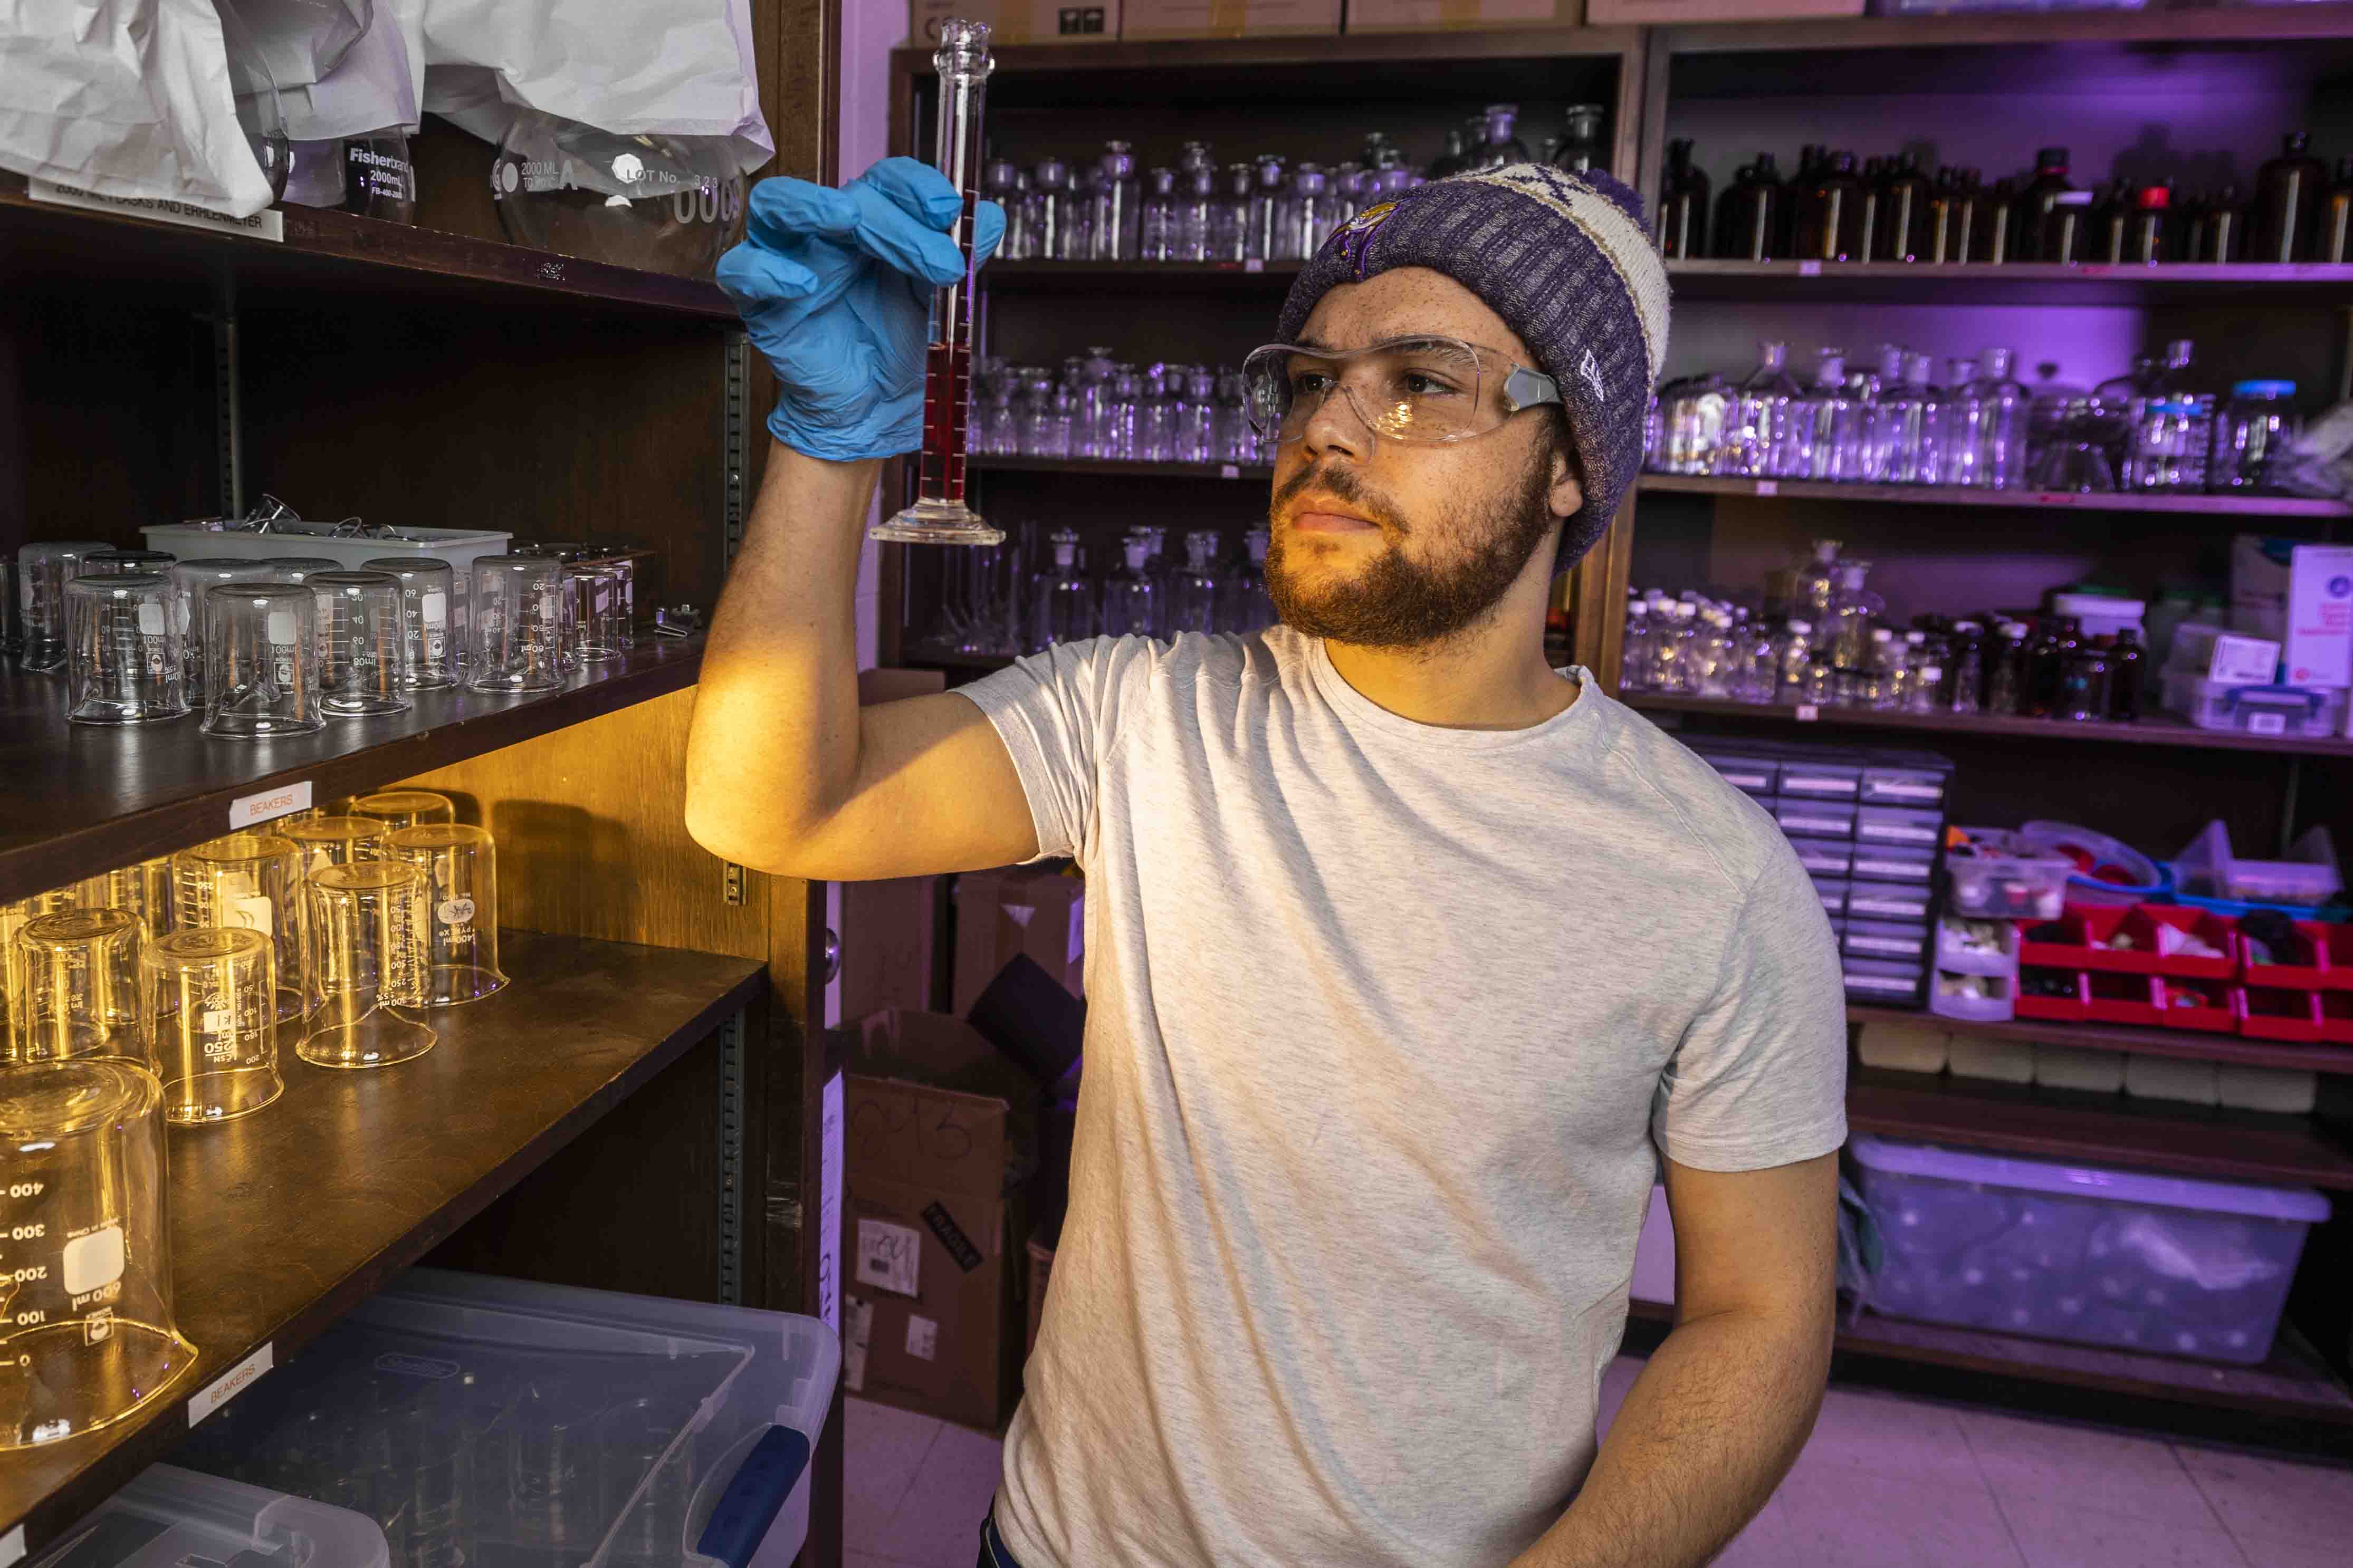 John, in a white t-shirt and purple Knox beanie and wearing blue surgical gloves, holds up and observes a measuring cylinder. 